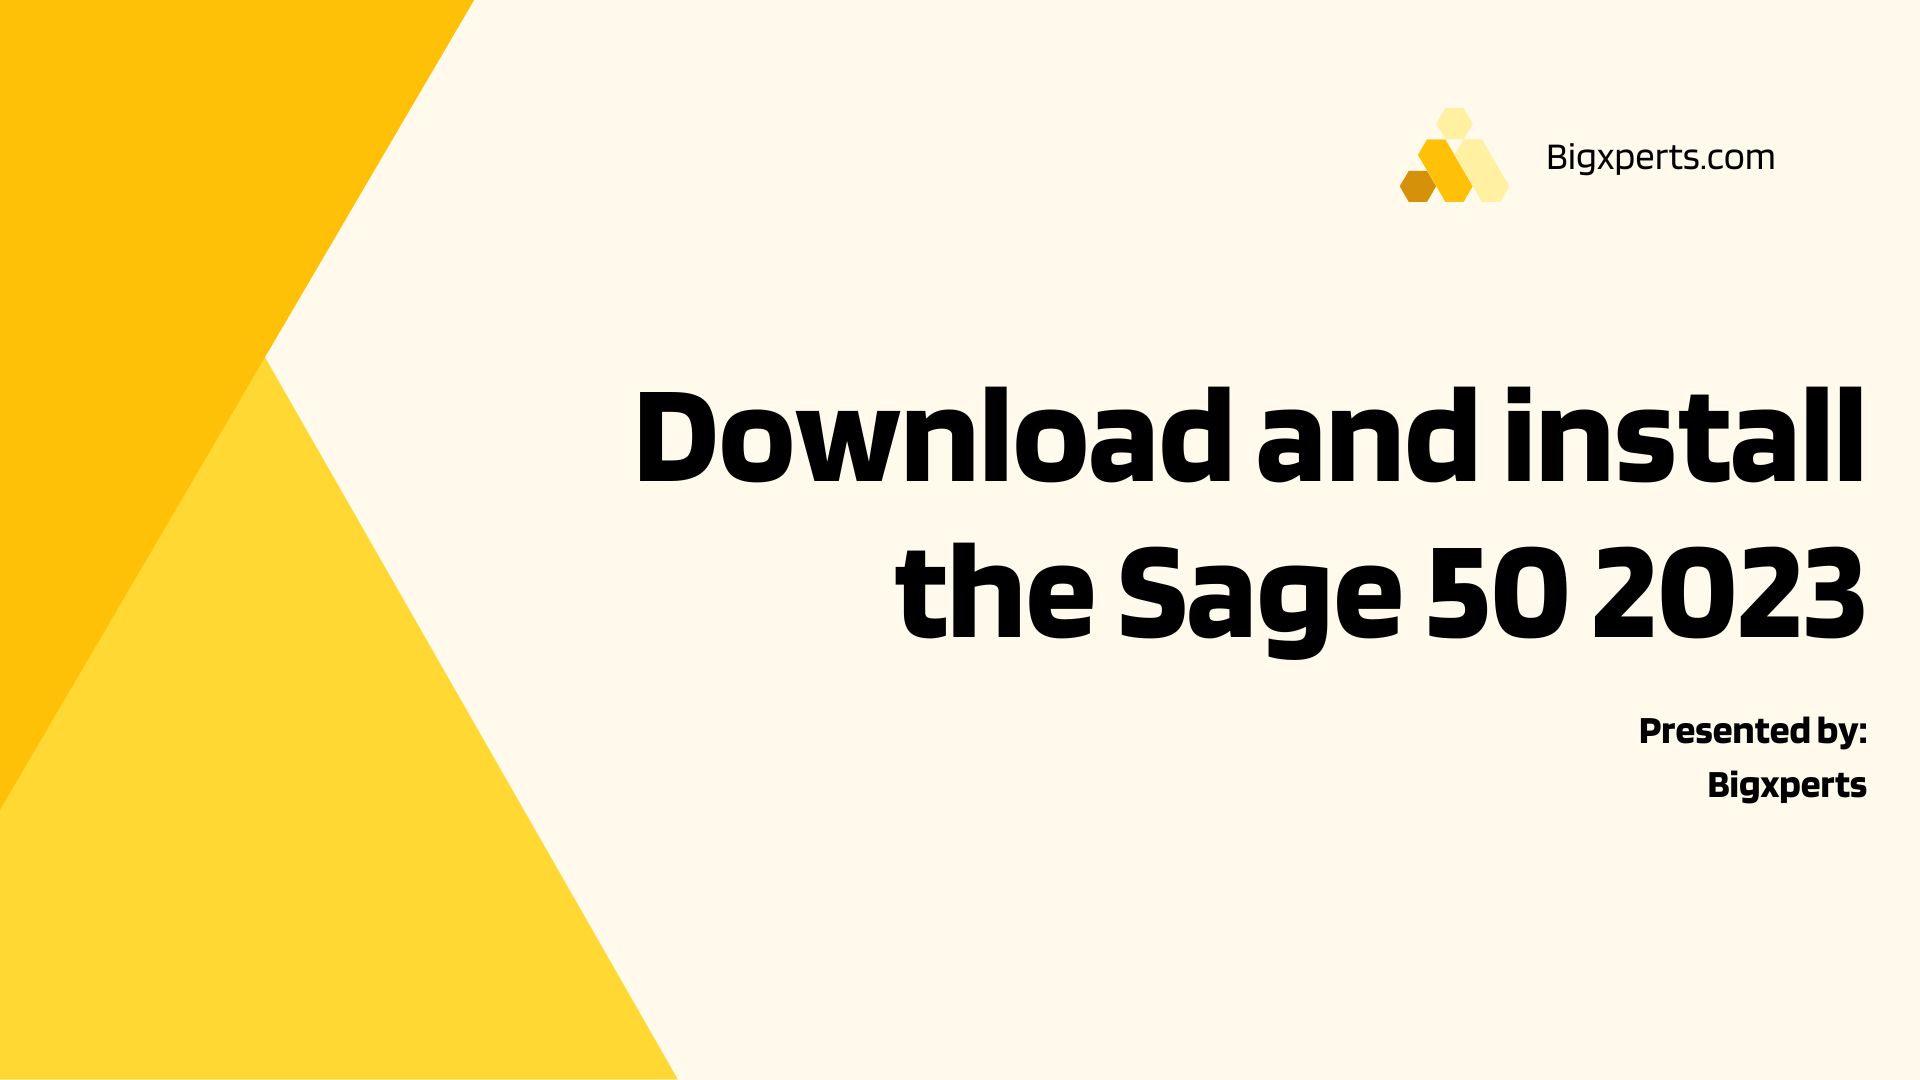 Download and install the Sage 50 2023